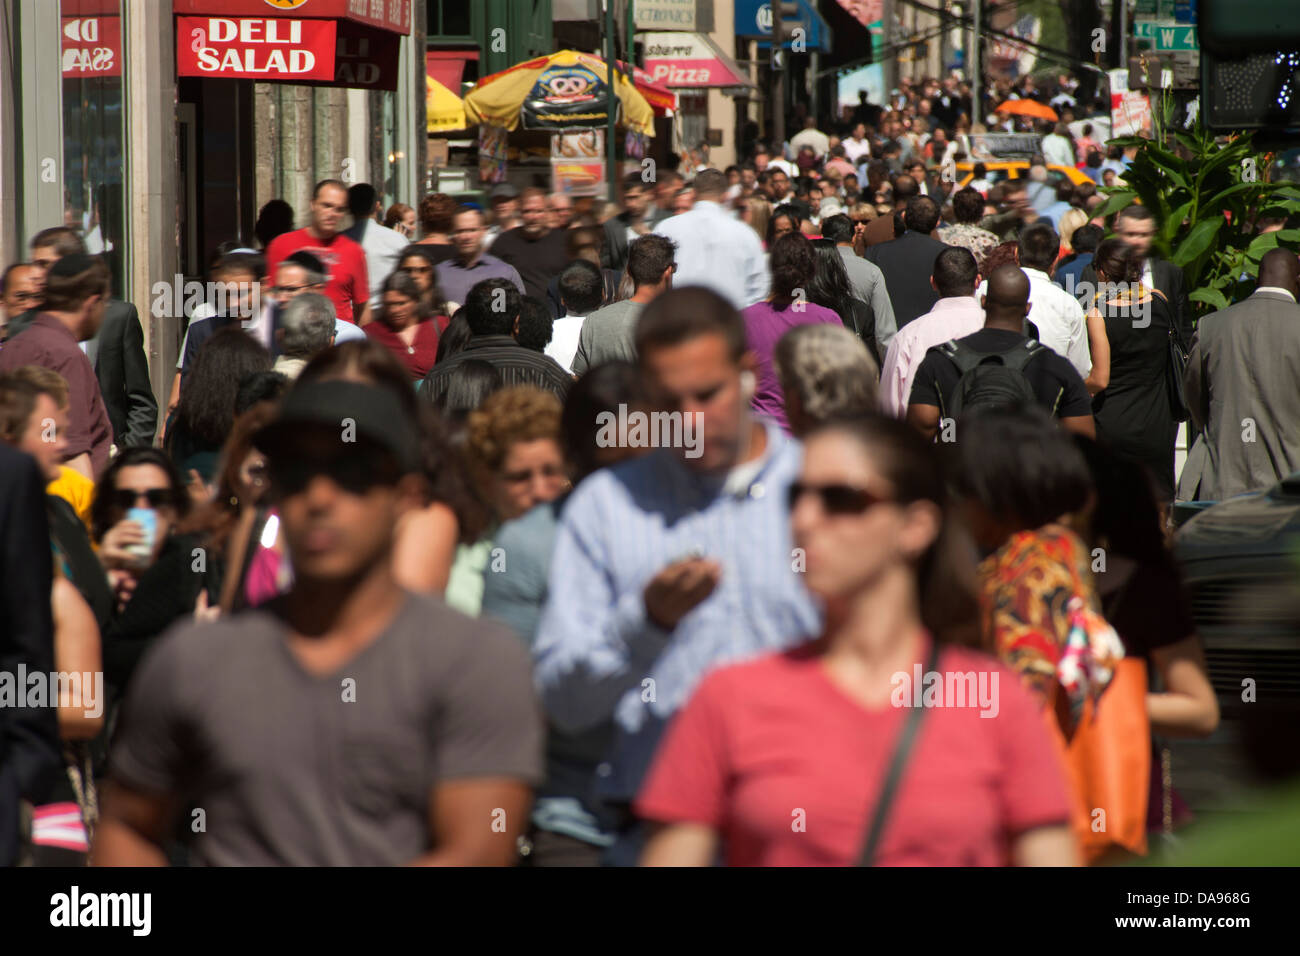 LUNCHTIME CROWD FIFTH AVENUE MIDTOWN MANHATTAN NEW YORK CITY USA Stock Photo